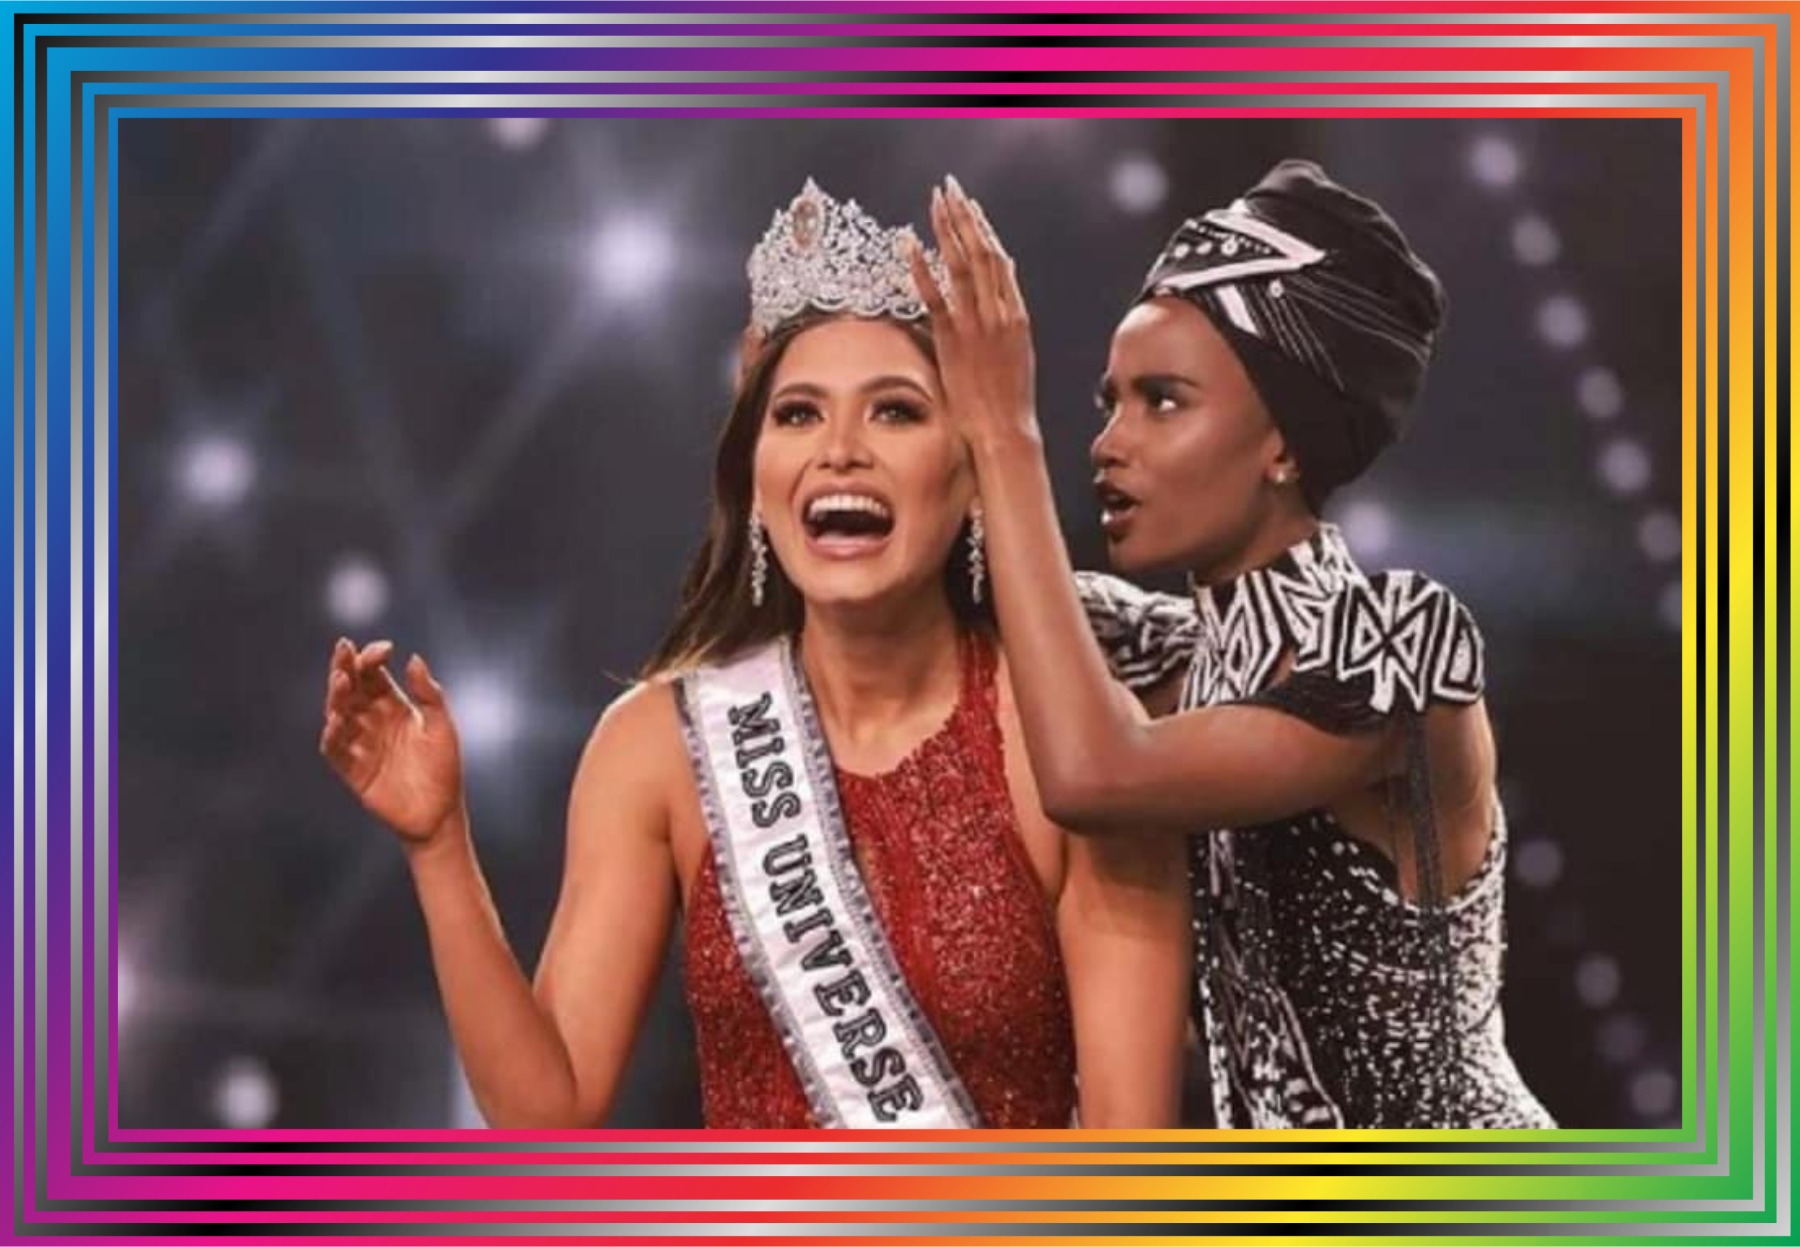 Read more about the article “Miss Universe 2020 Pageant- Mexican Beauty Andrea Meza Wins The Crown”